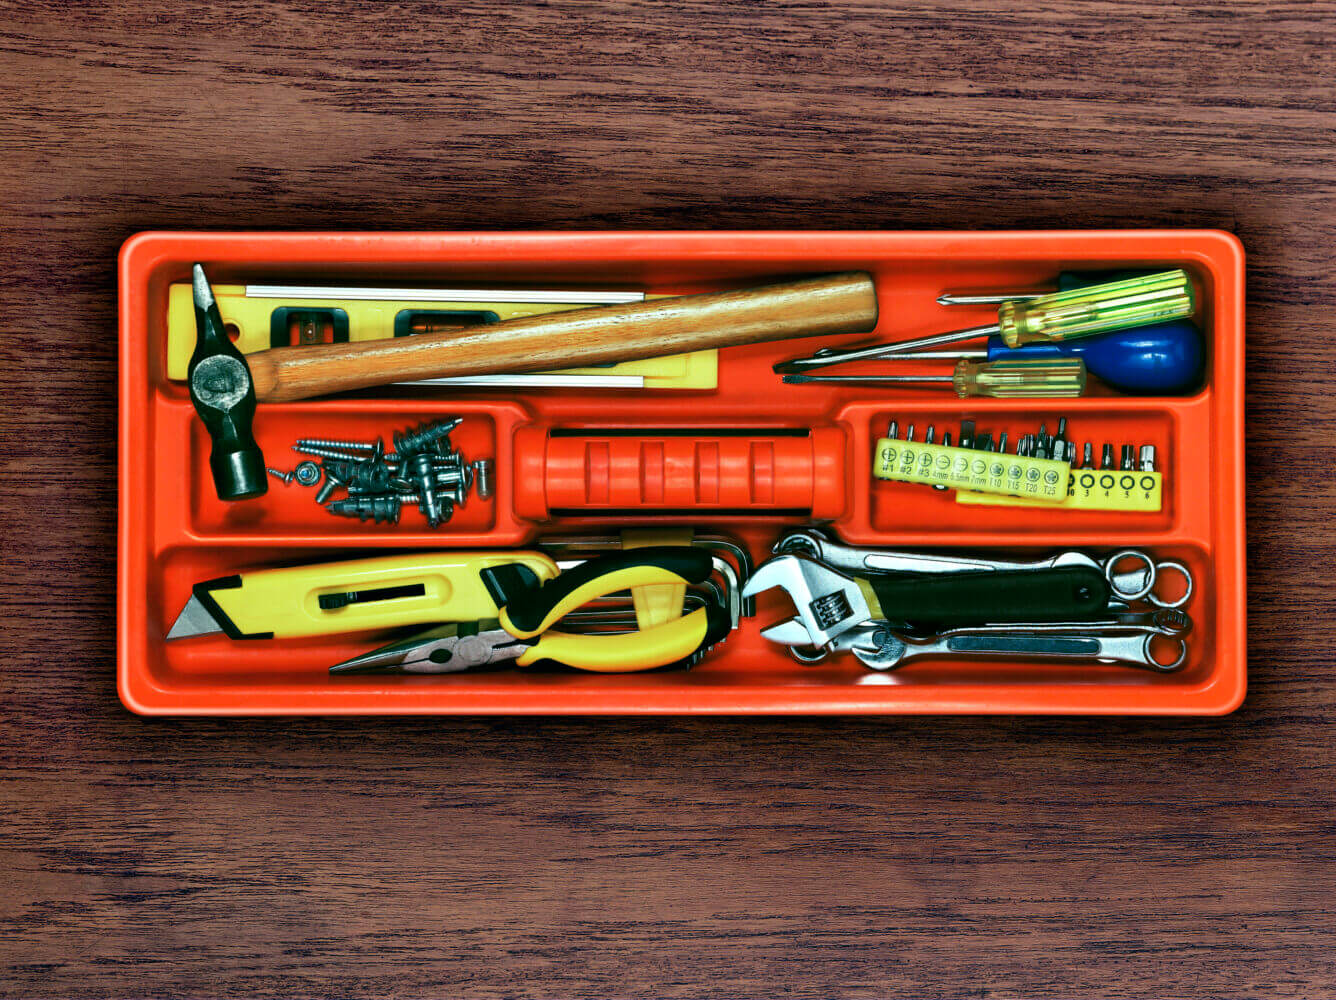 A Diy Tool Tray containing hammers, screwdrivers, pliers, level, spanners and screws